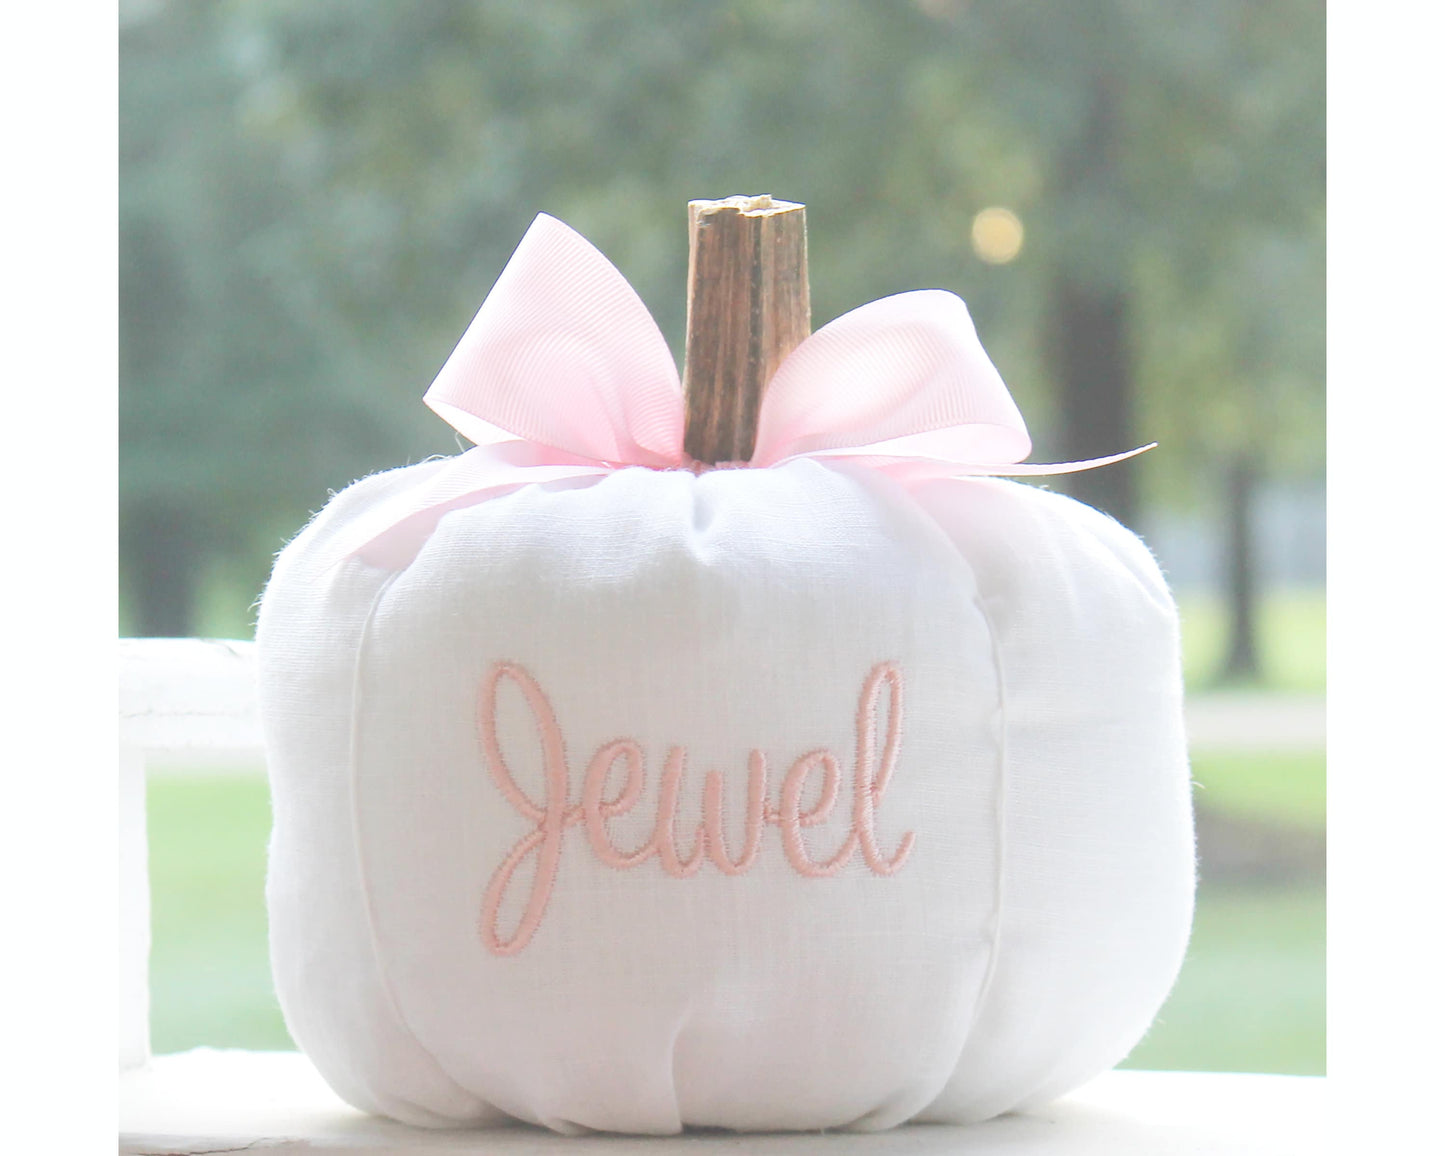 Cinderella Personalized Bow Pumpkin I Monogrammed Princess White with Pink or Blue Pumpkin I Fall Baby Pumpkin I Fall Decor Pumpkin